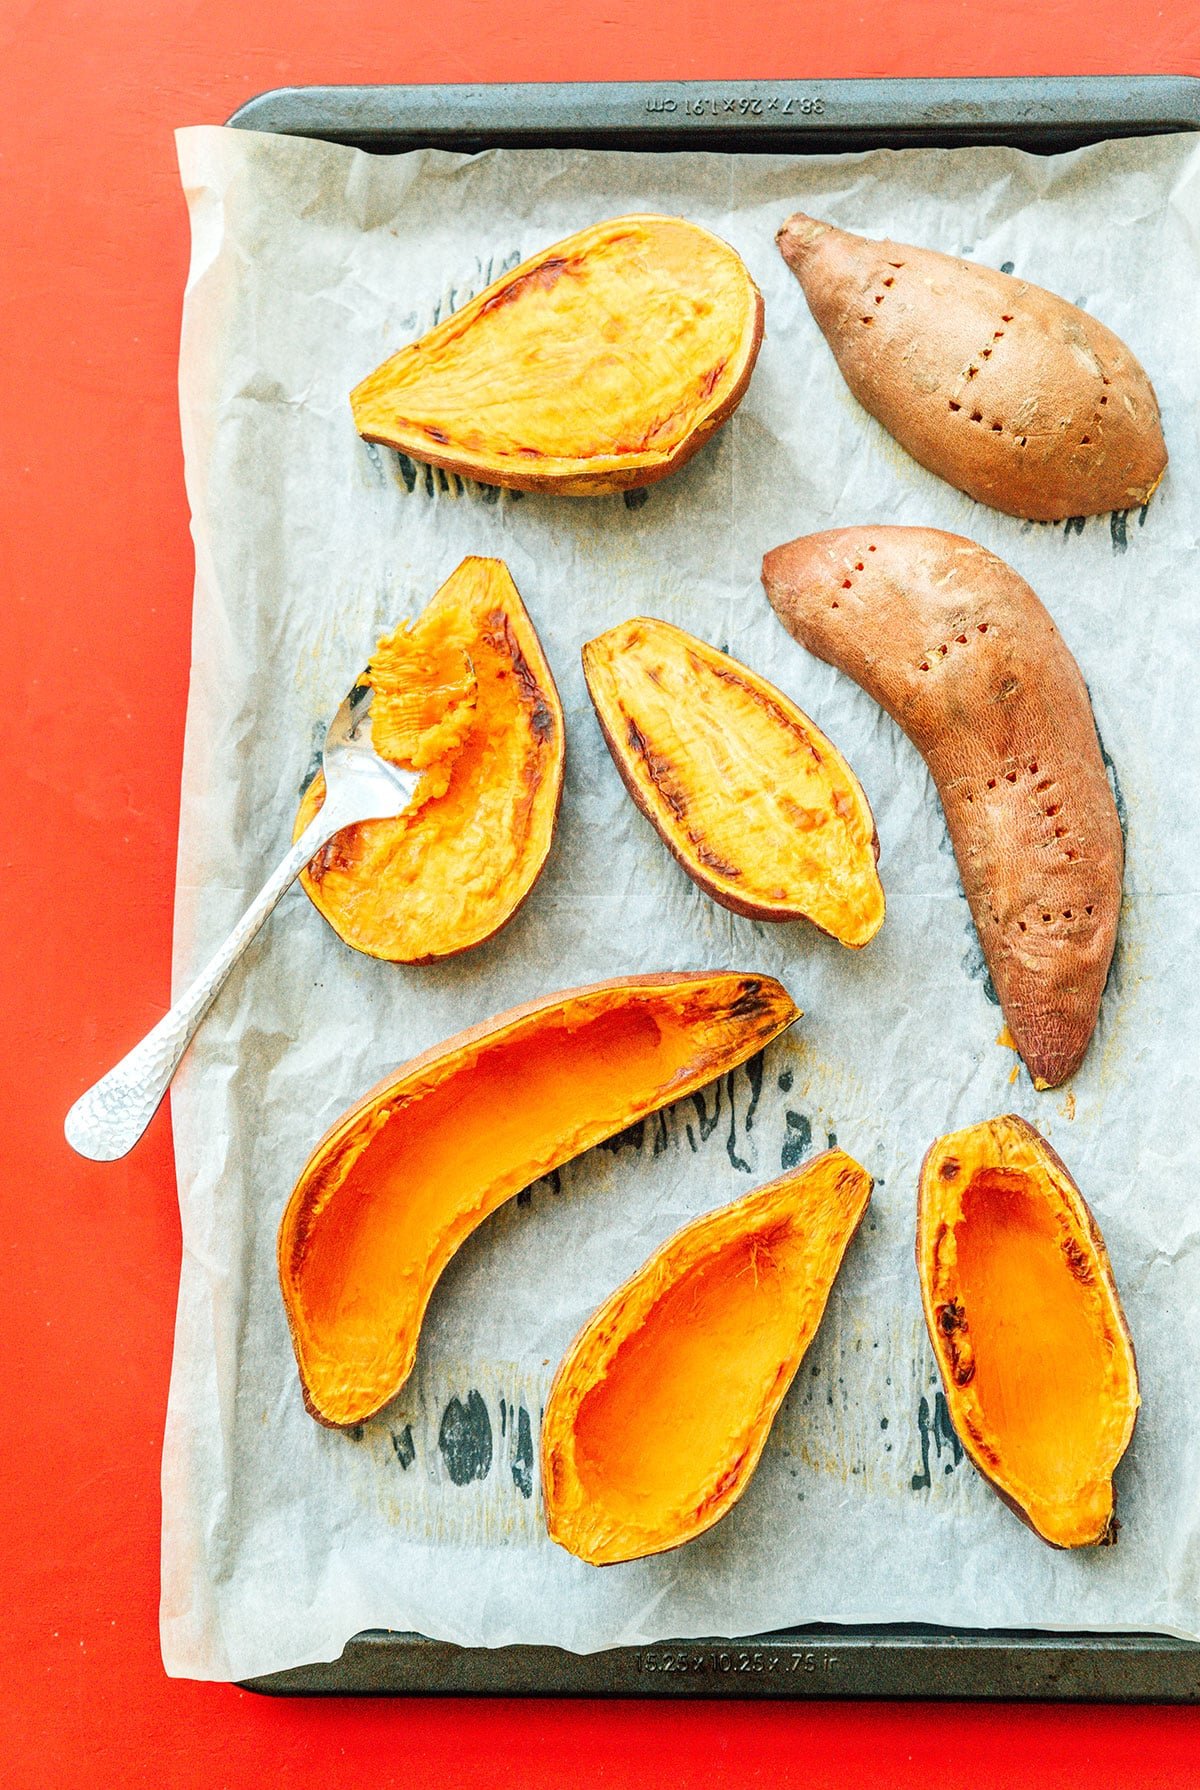 A fork removing the flesh from cooked sweet potato halves